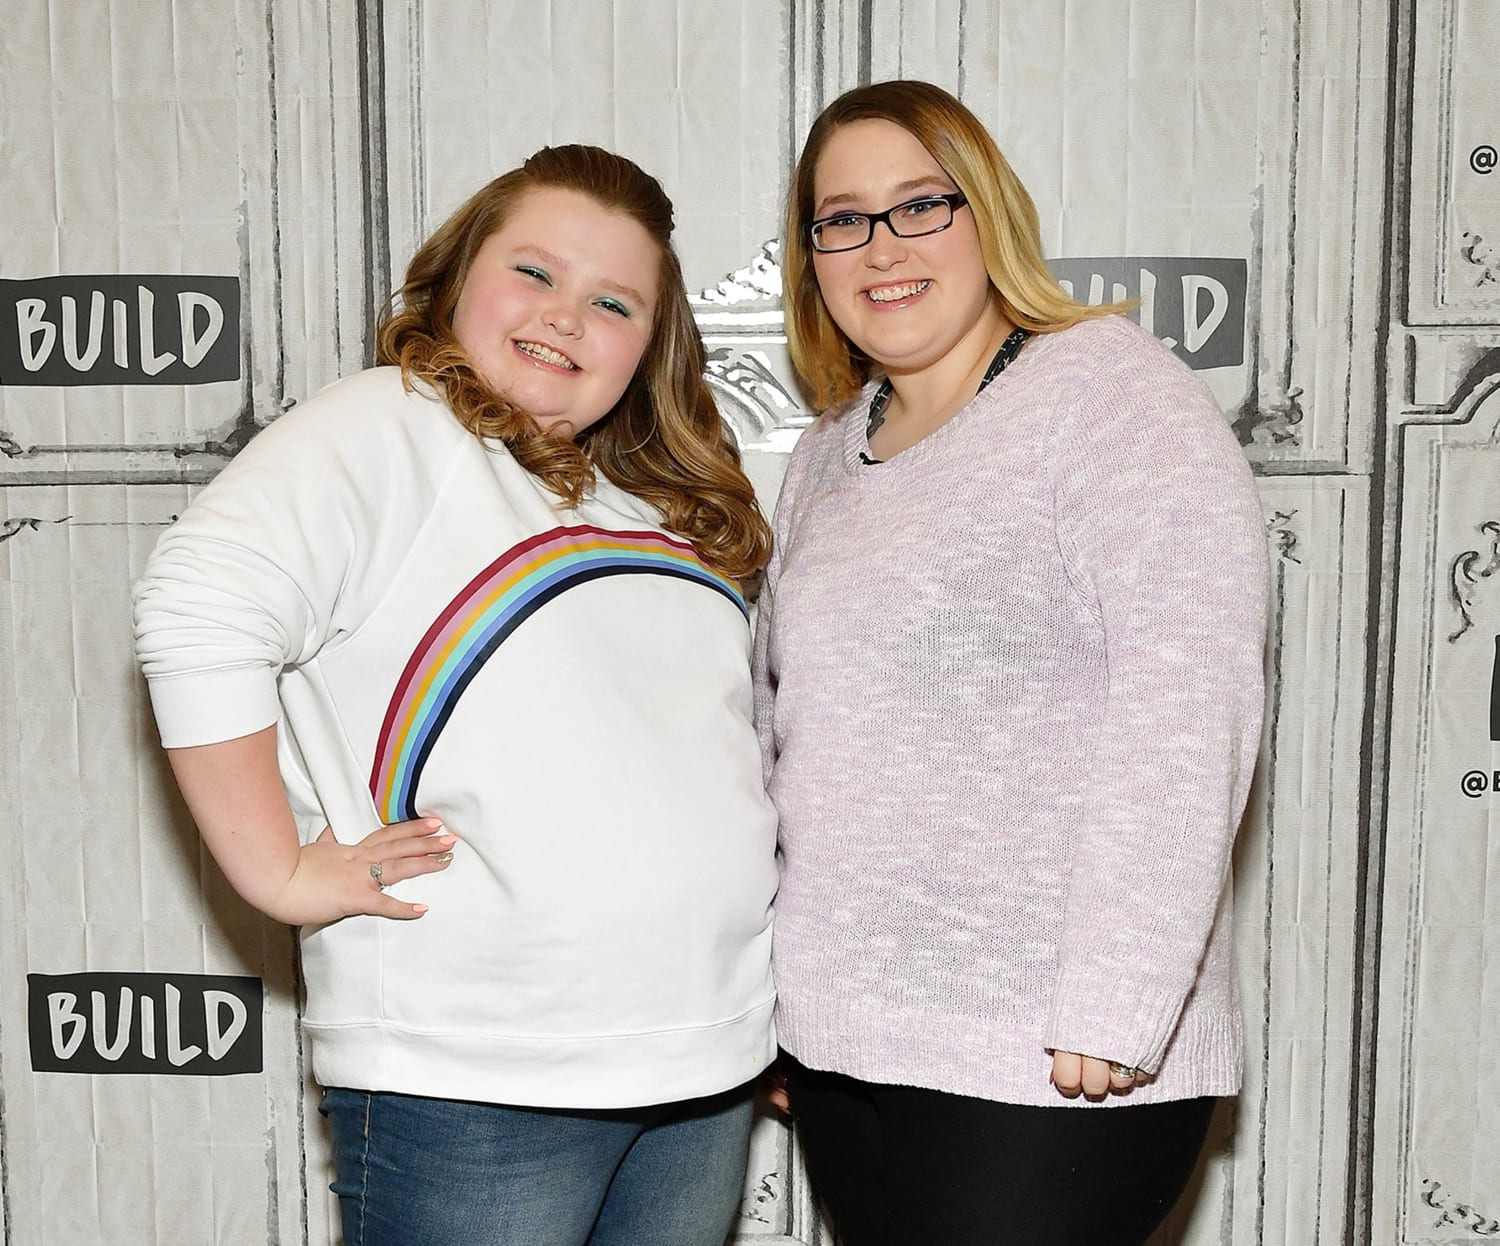 From a Size 18 to a Size 4! American Reality Star Mama June